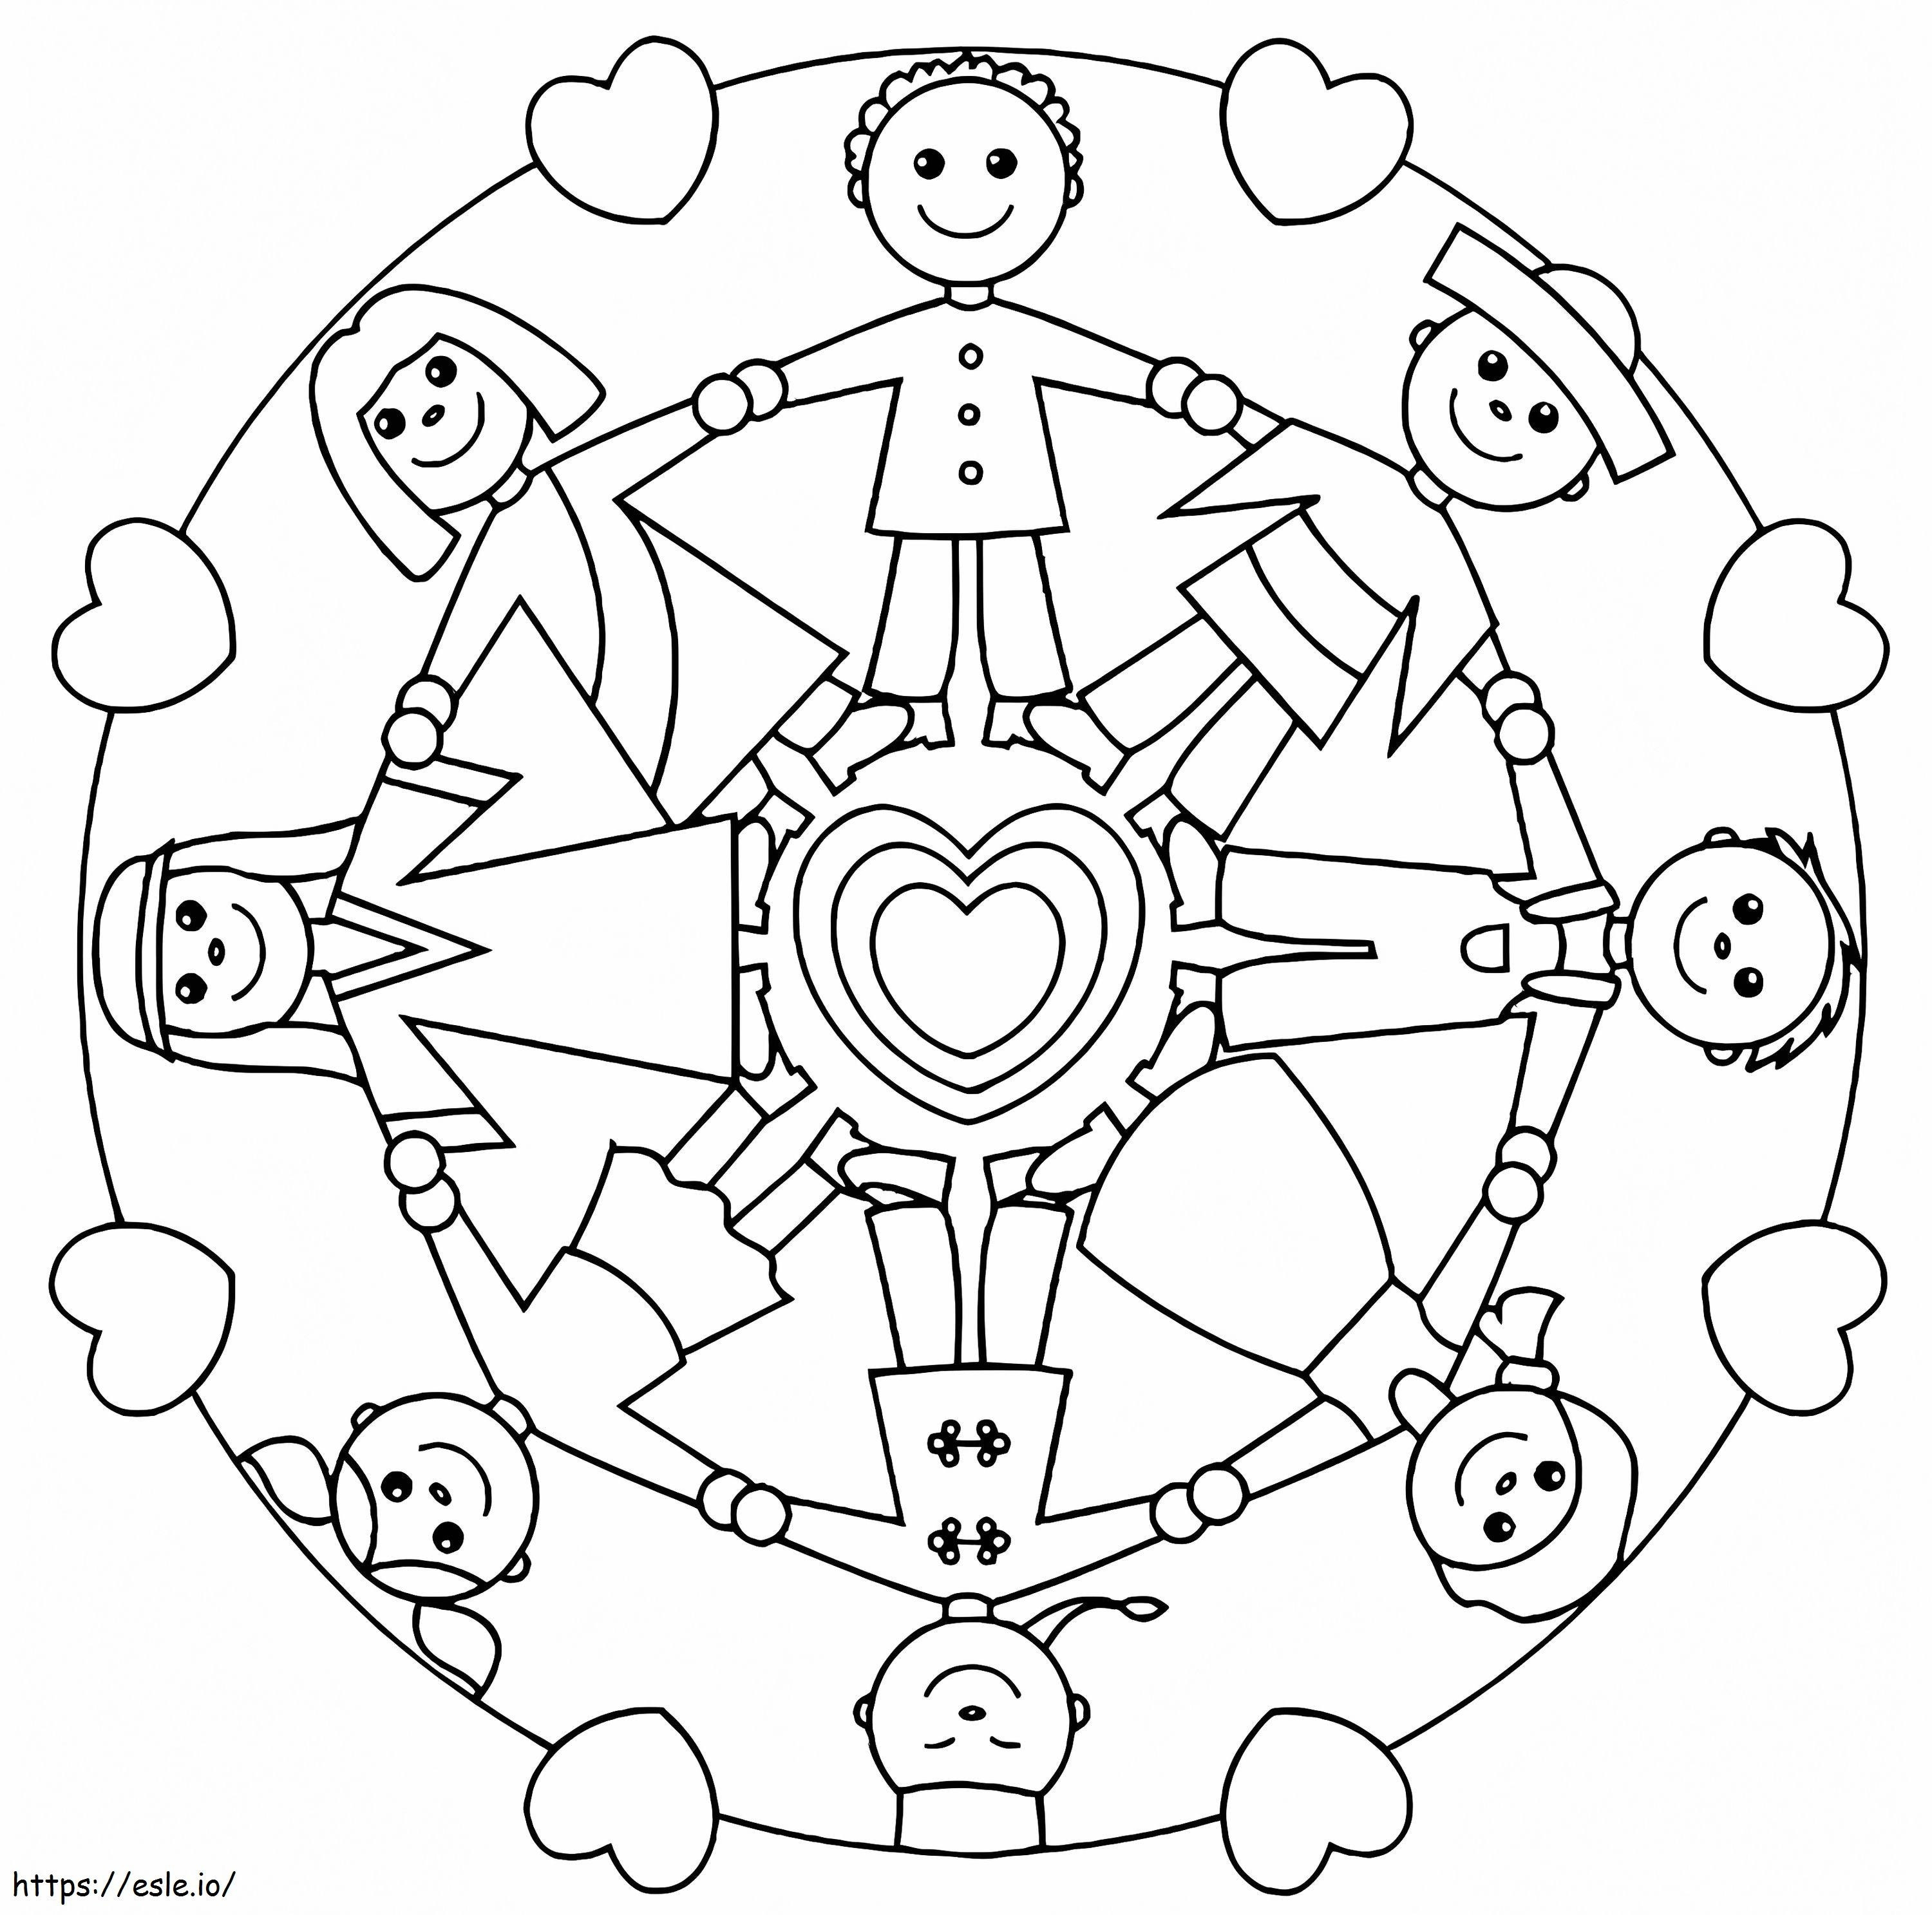 Free Printable World Thinking Day coloring page